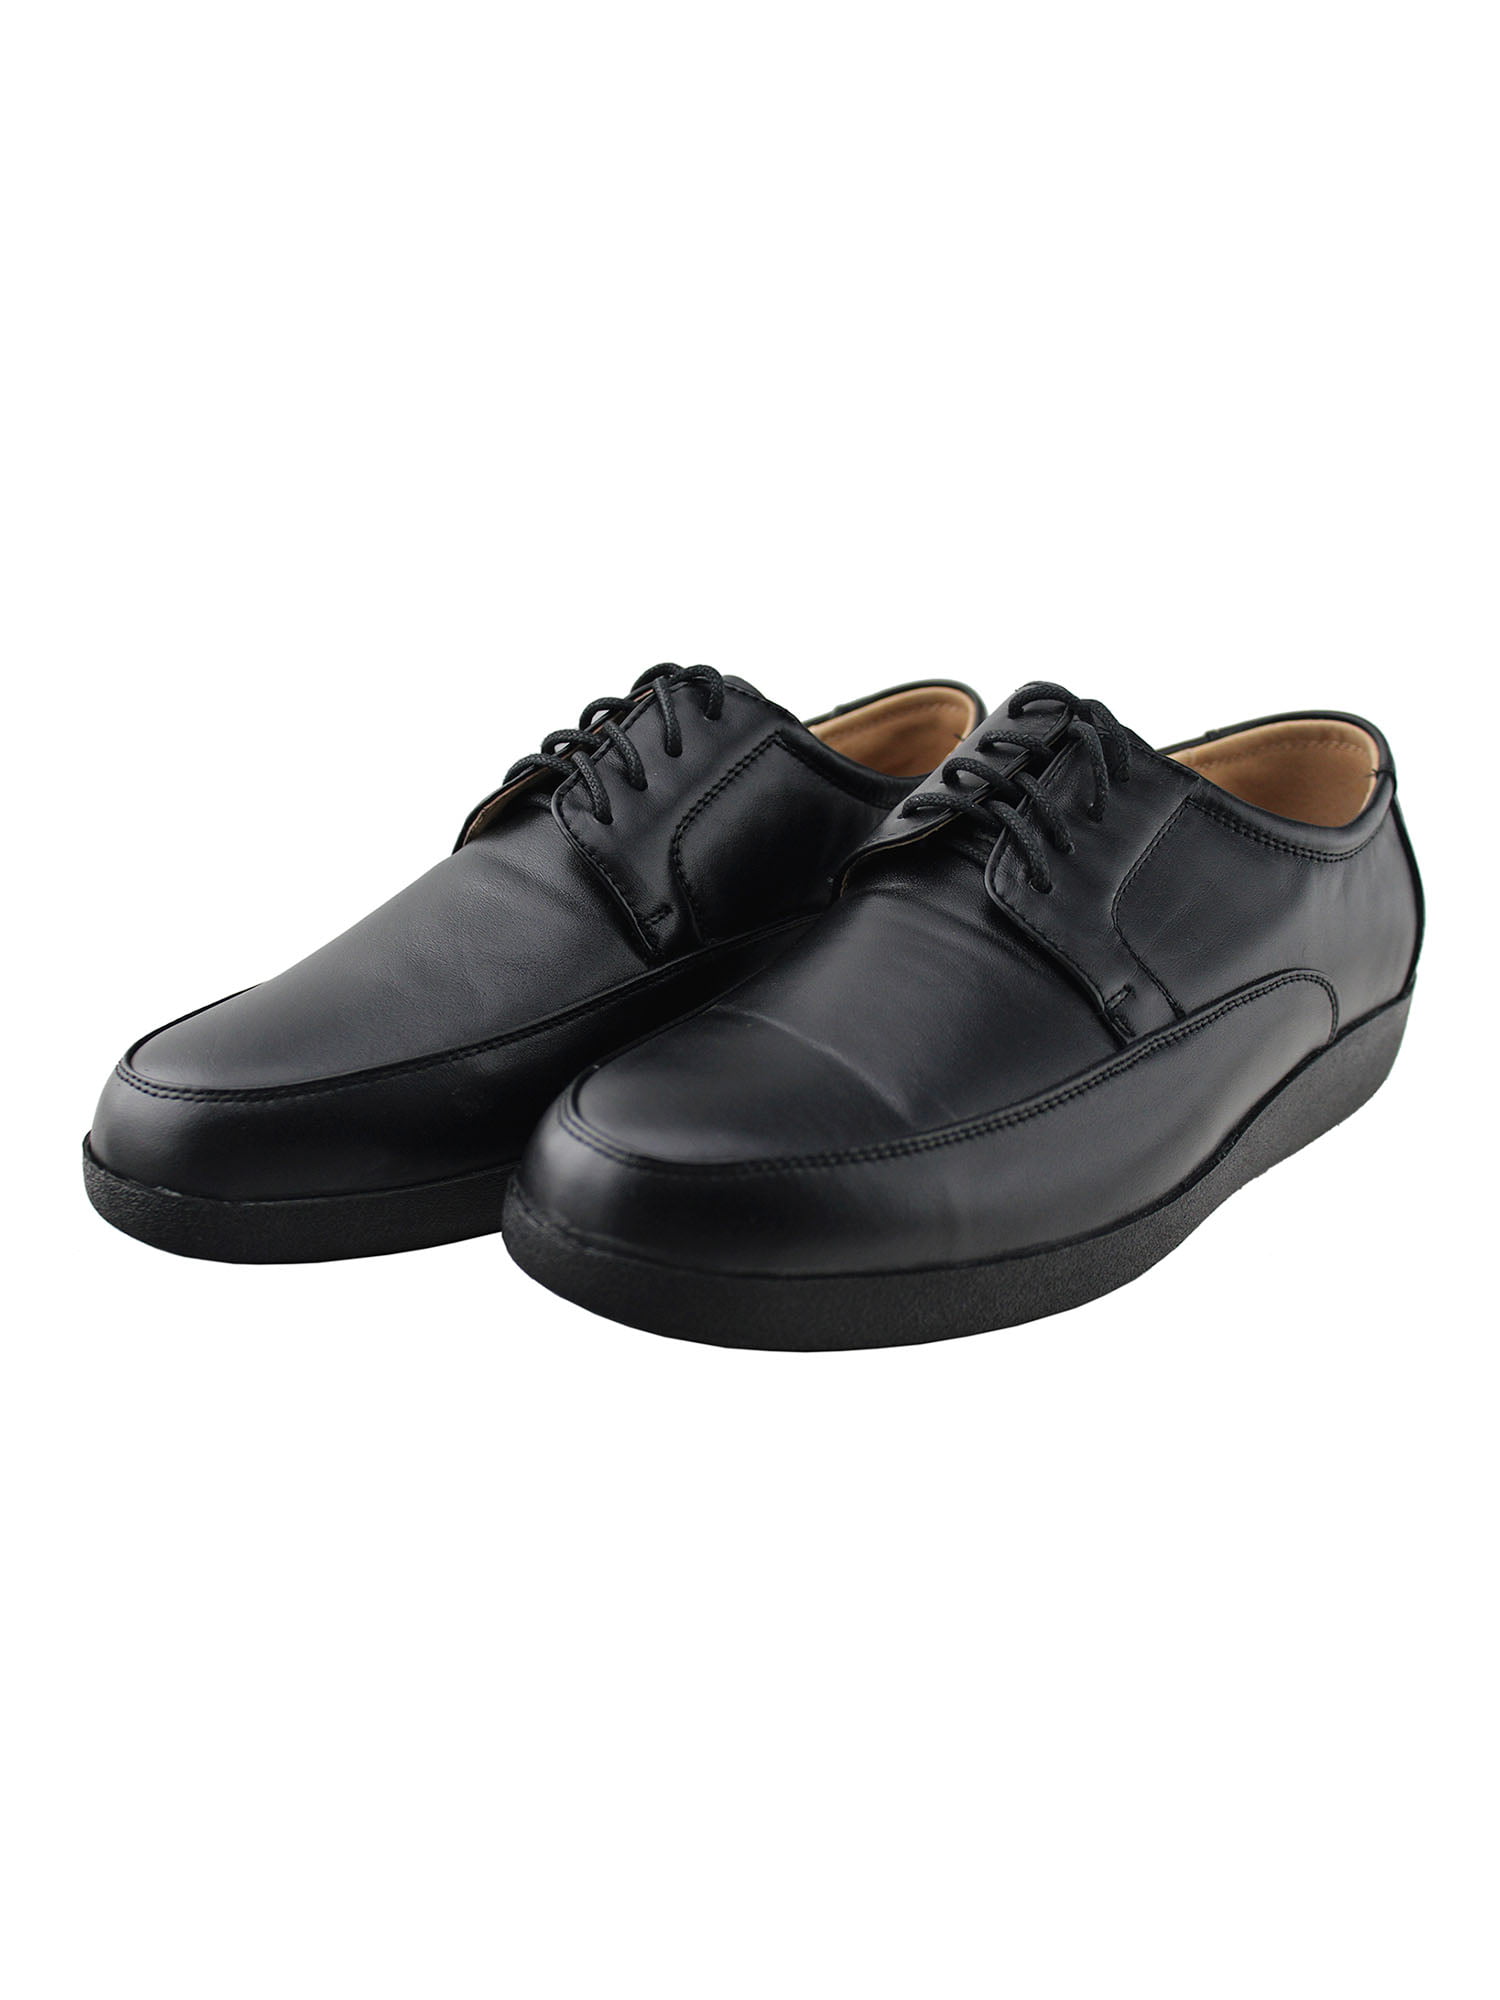 business casual shoes walmart